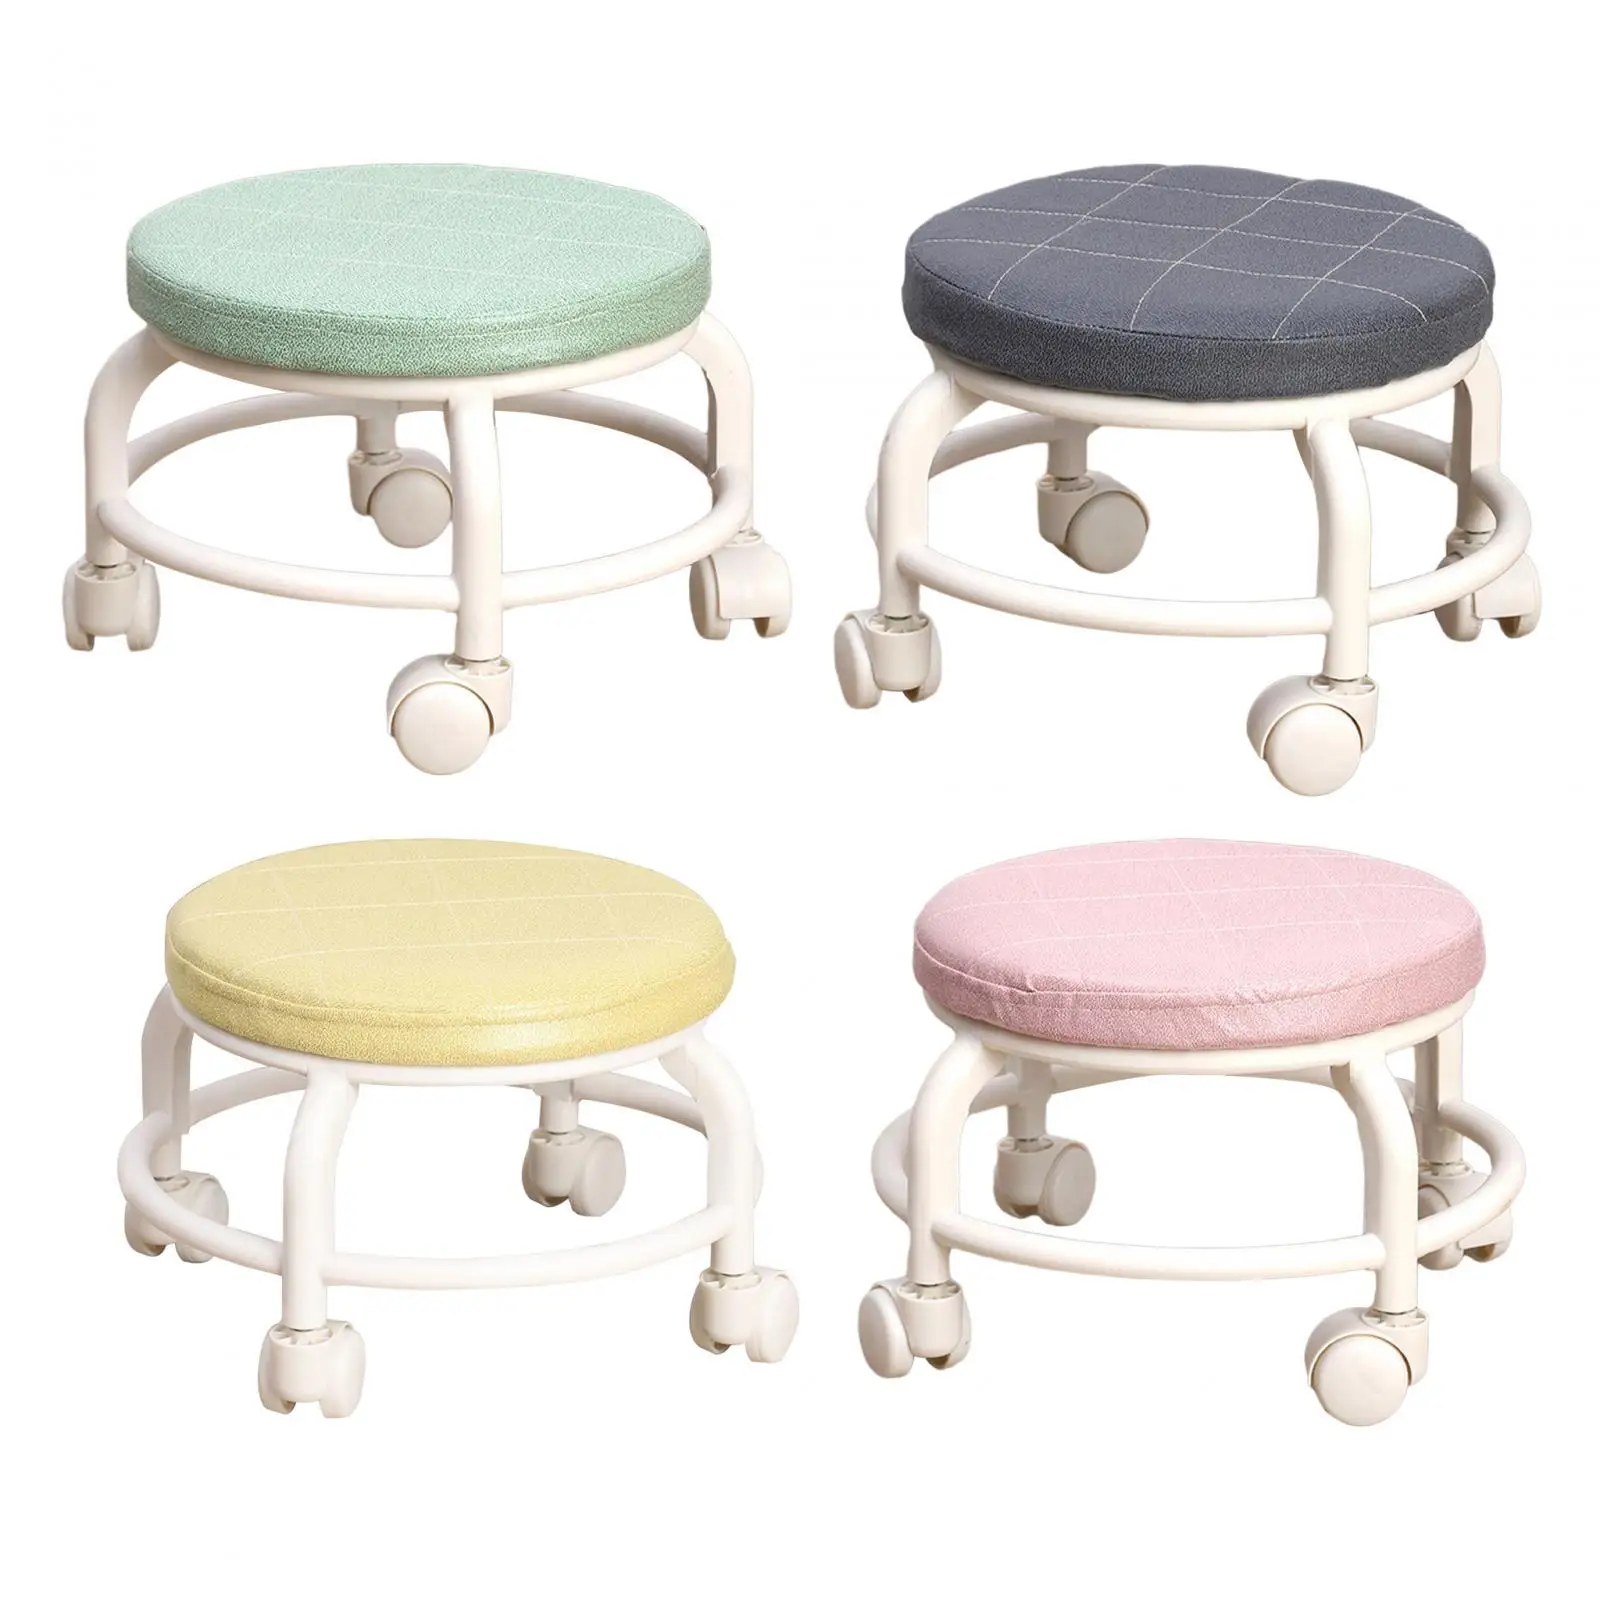 Low Round Roller Seat Stool Comfortable 360° Rotating Rolling Stool Shoe Stool Seat Movable Mini Stool Pedicure Stool Office